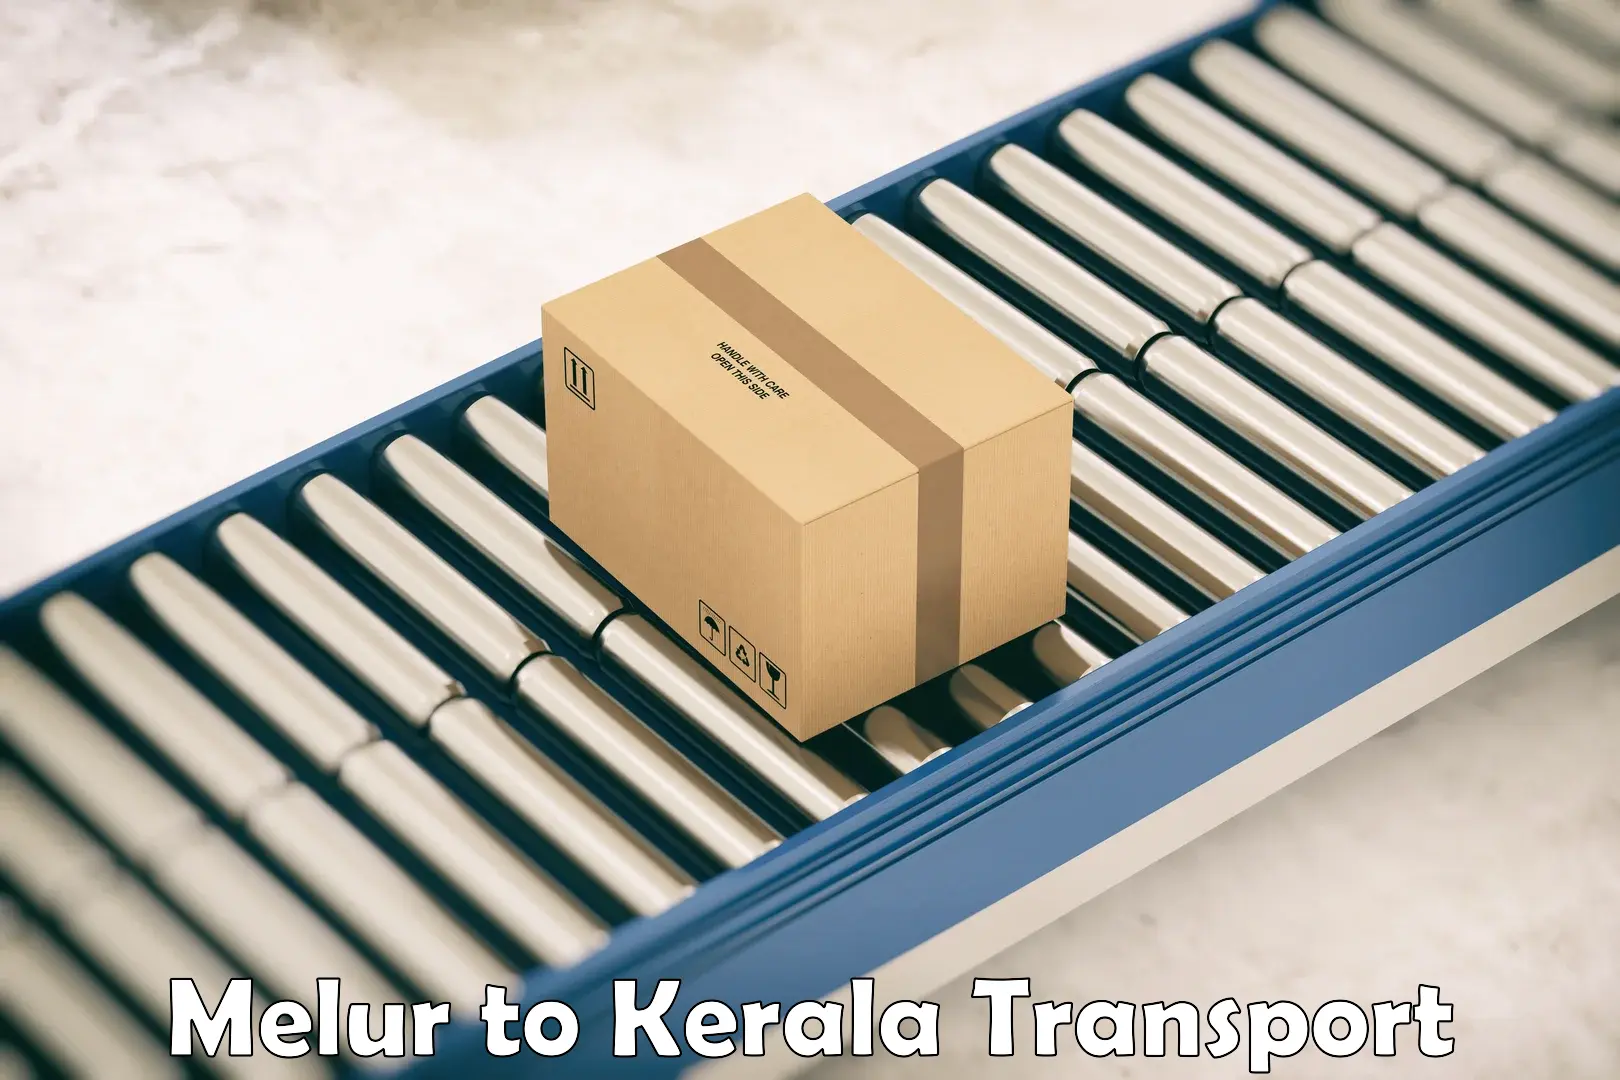 Air freight transport services Melur to Kothamangalam